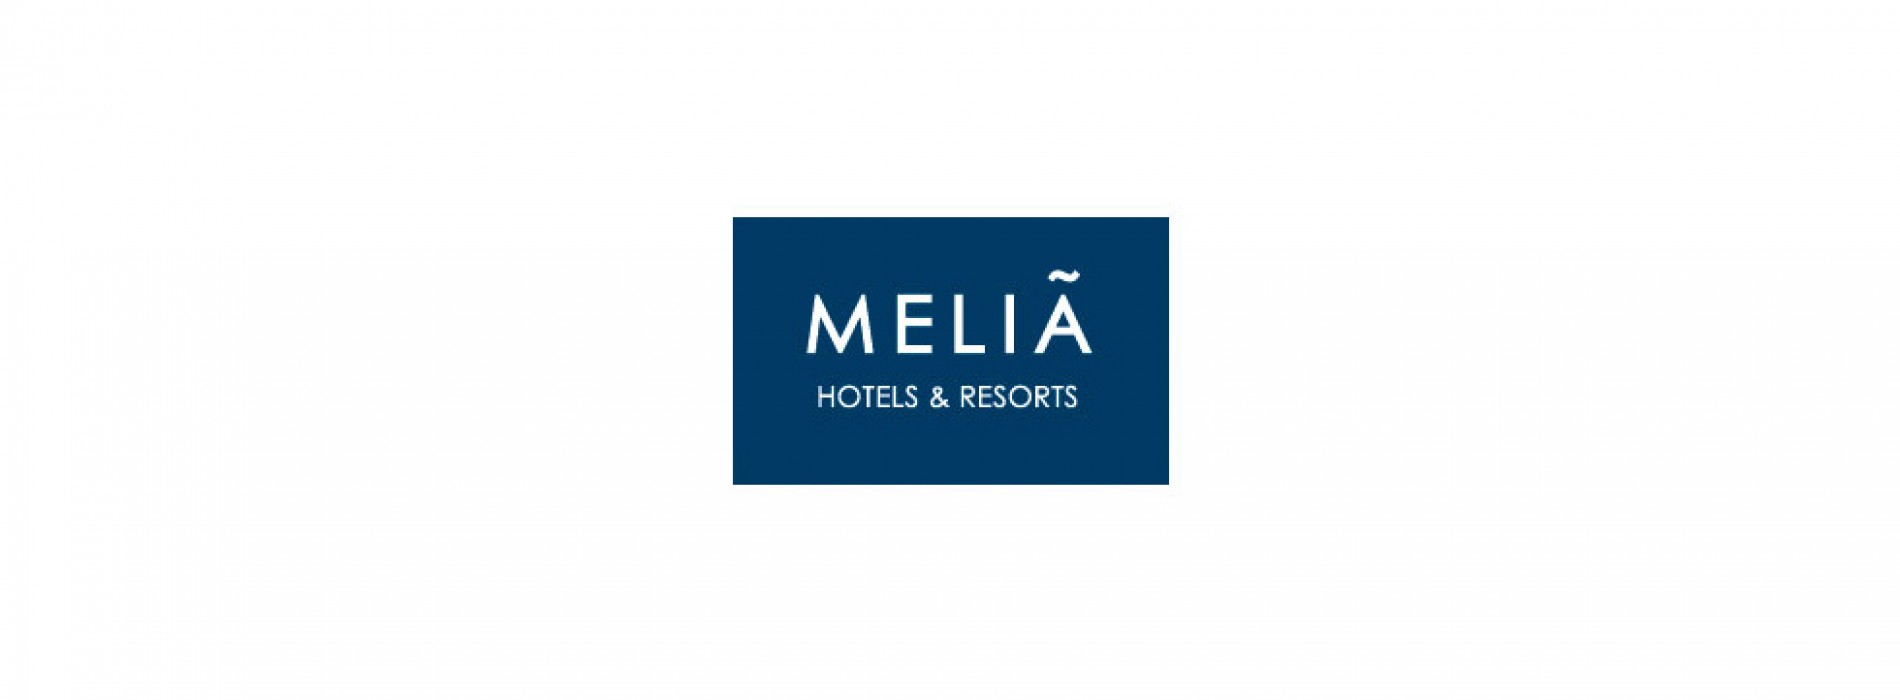 Melia Hotels International awarded the prestigious “Hall of Fame Award” at the Hotel Investors Conference Europe (Hot.E)